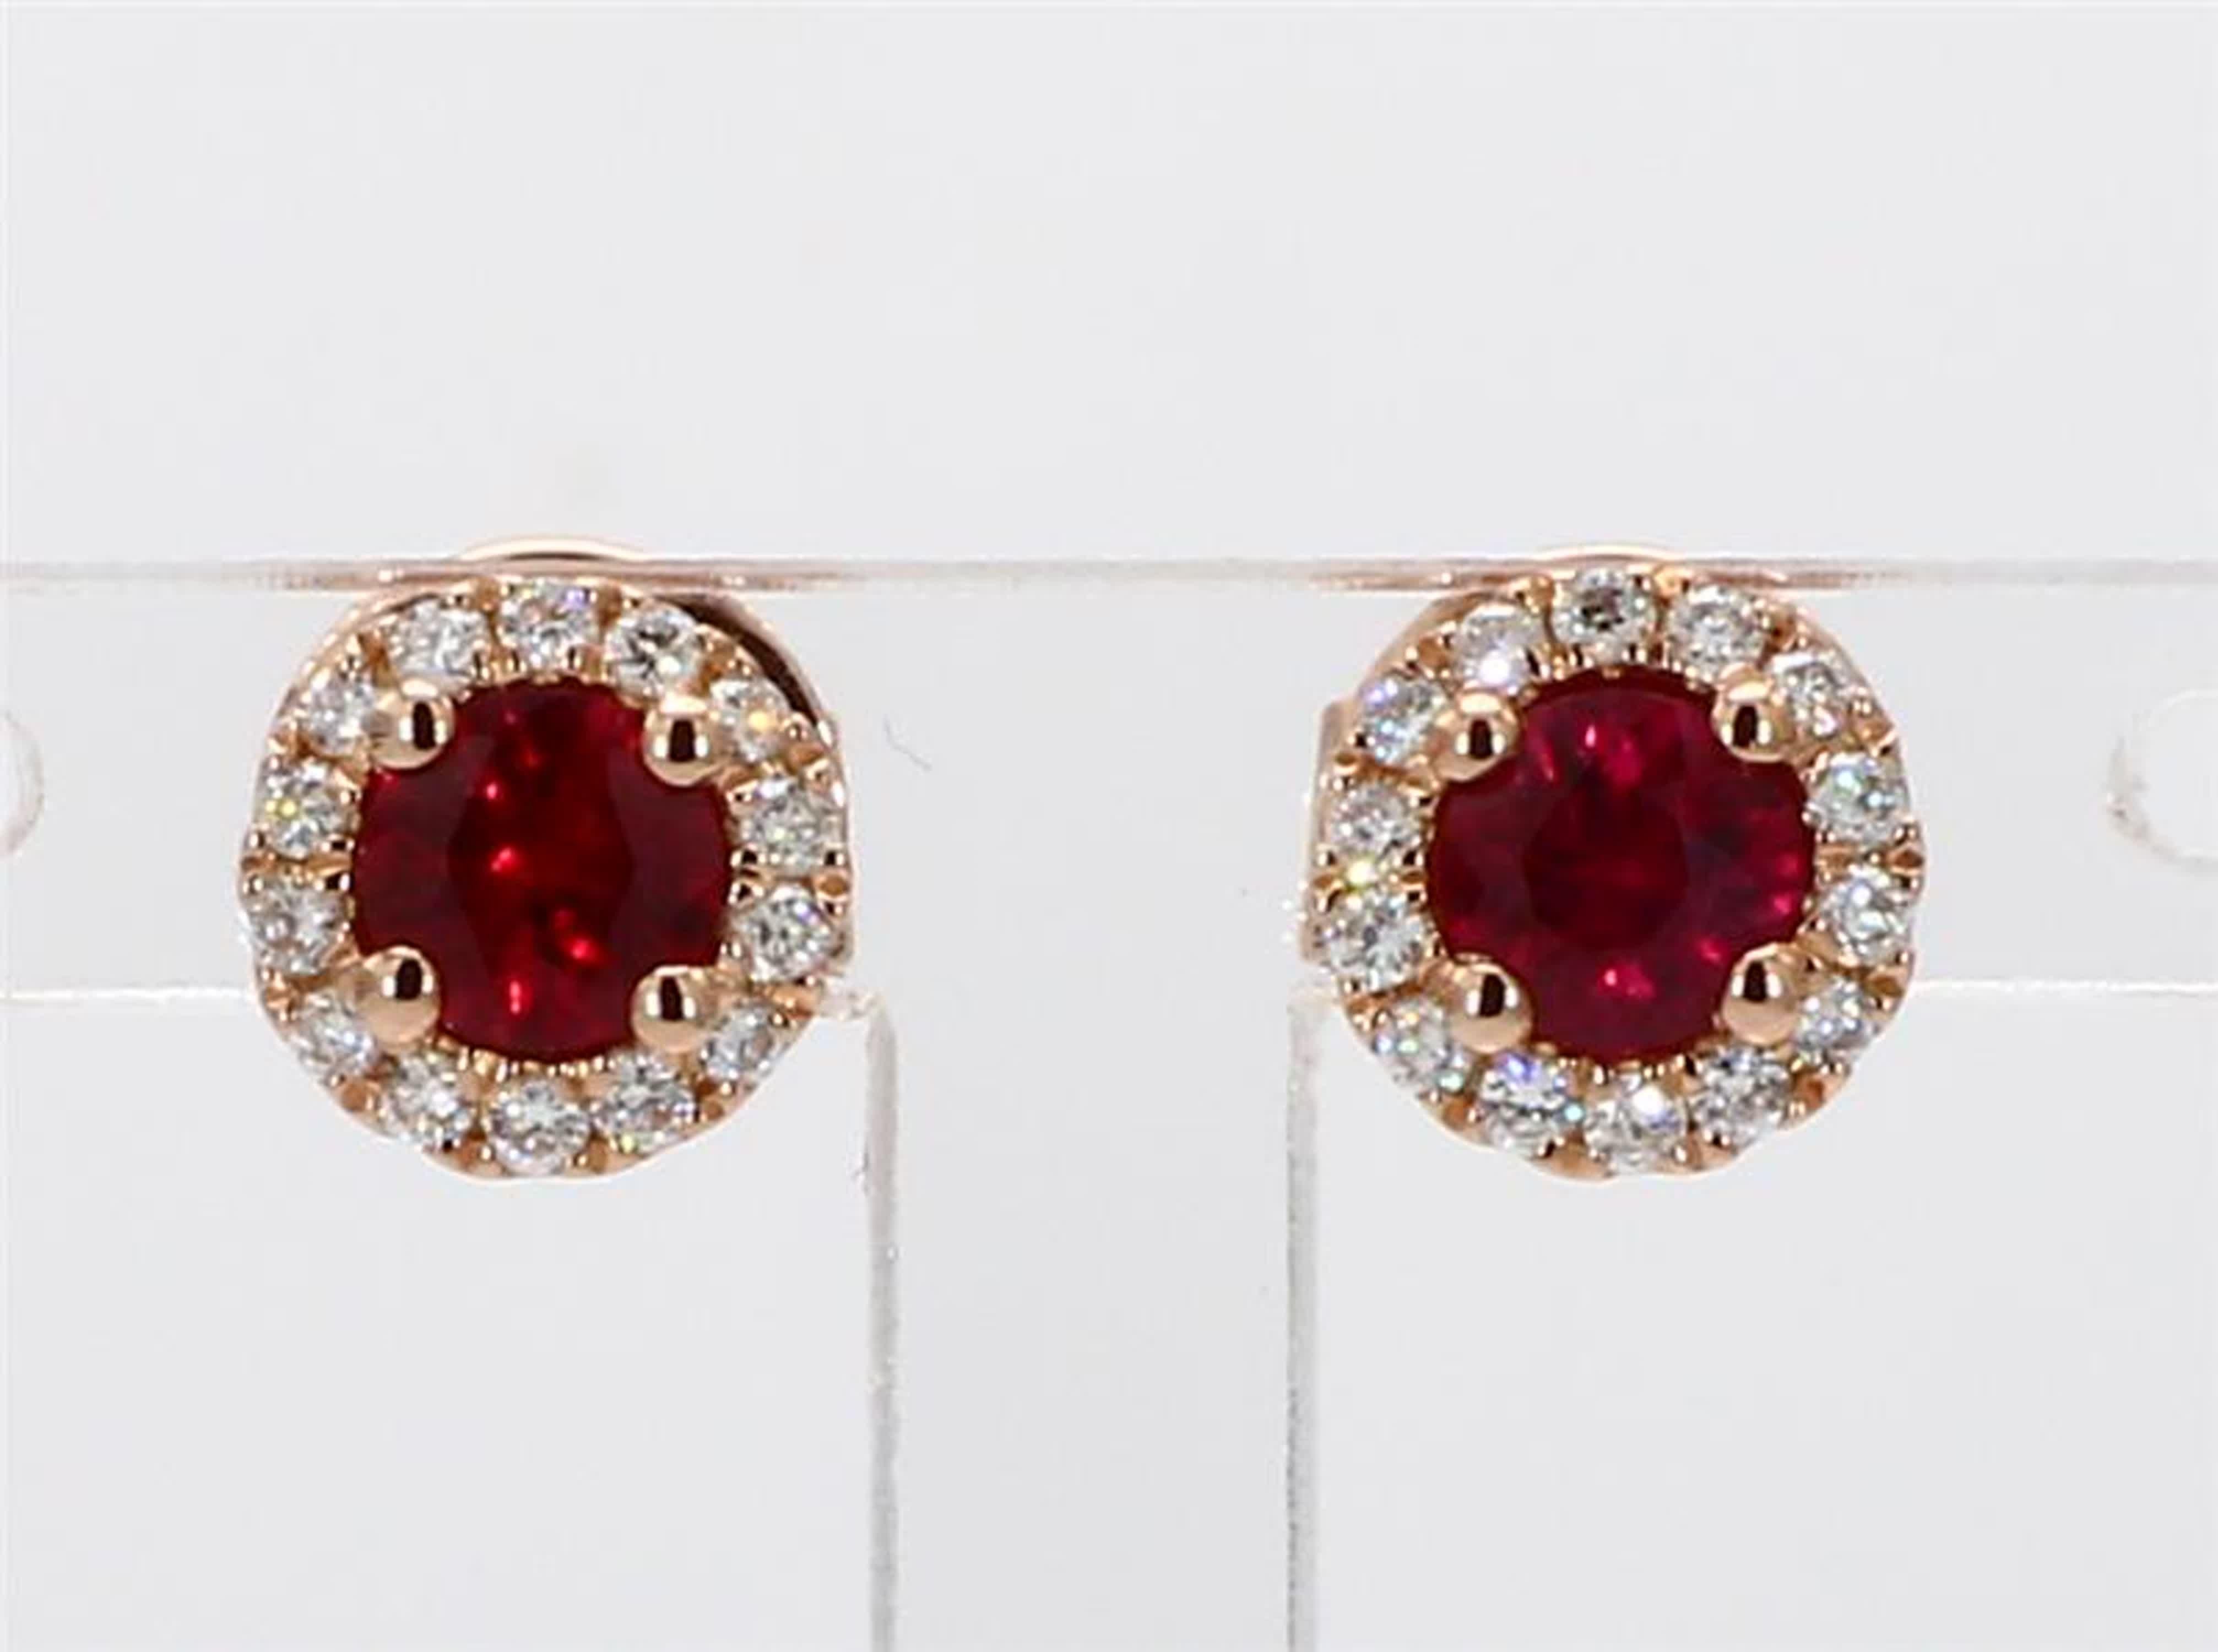 RareGemWorld's classic ruby earrings. Mounted in a beautiful 14K Rose Gold setting with natural round cut red ruby's. These ruby's are surrounded by a halo of natural round white diamond melee. These earrings are guaranteed to impress and enhance